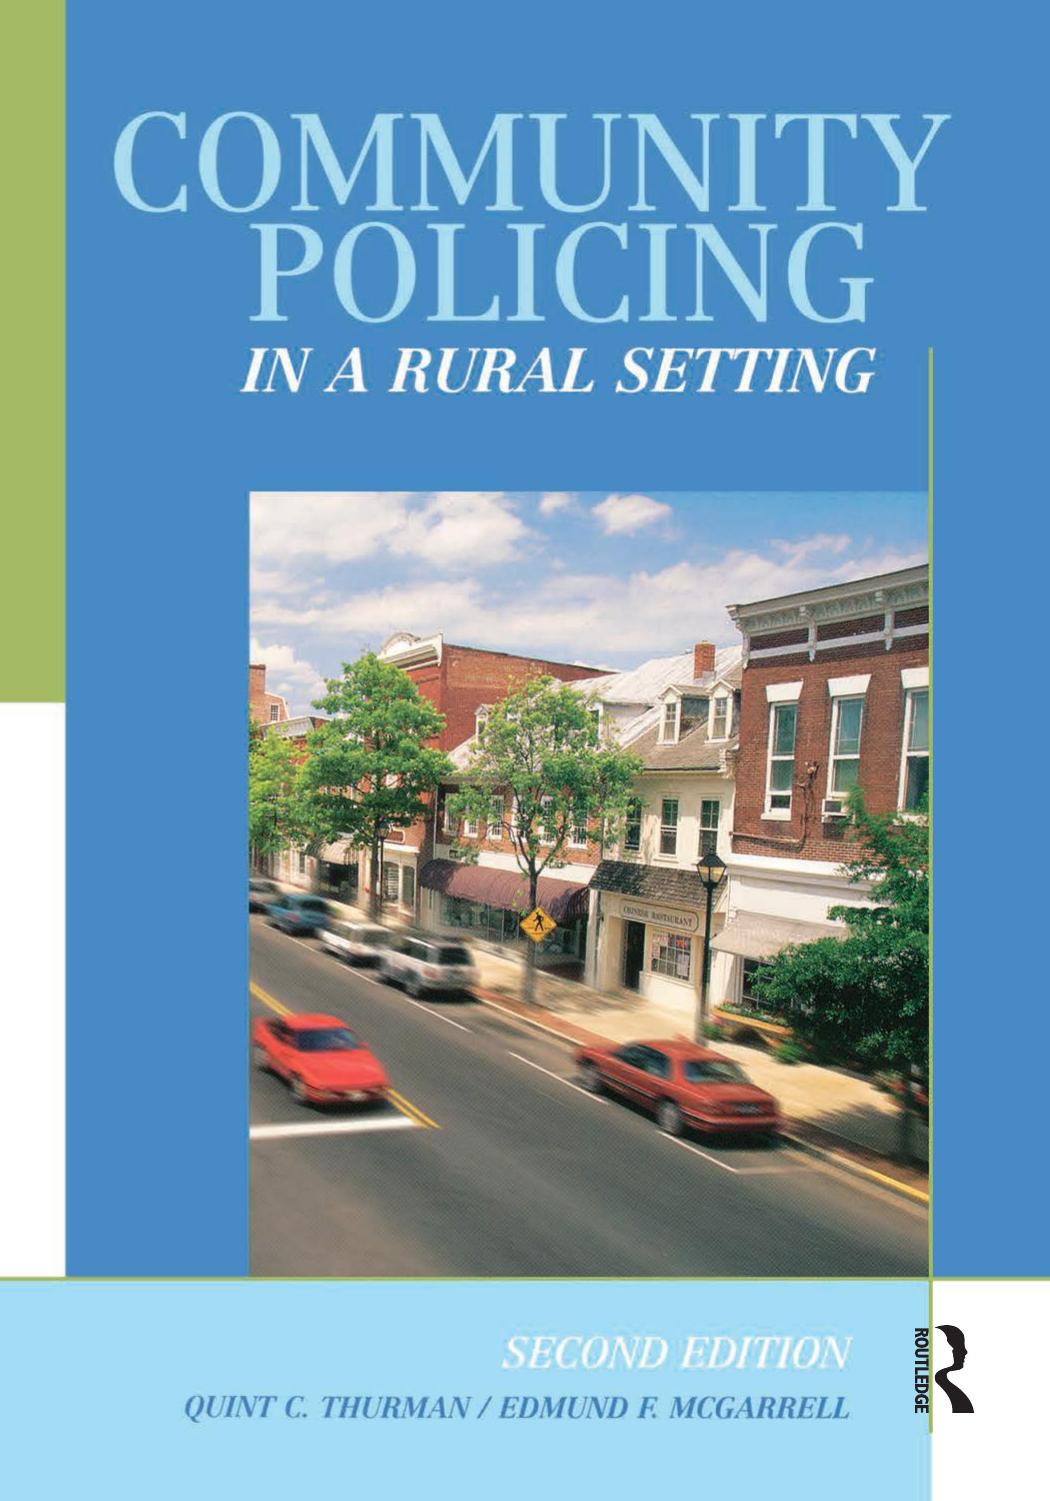 Community Policing in a Rural Setting by Quint Thurman; Edmund F. McGarrell